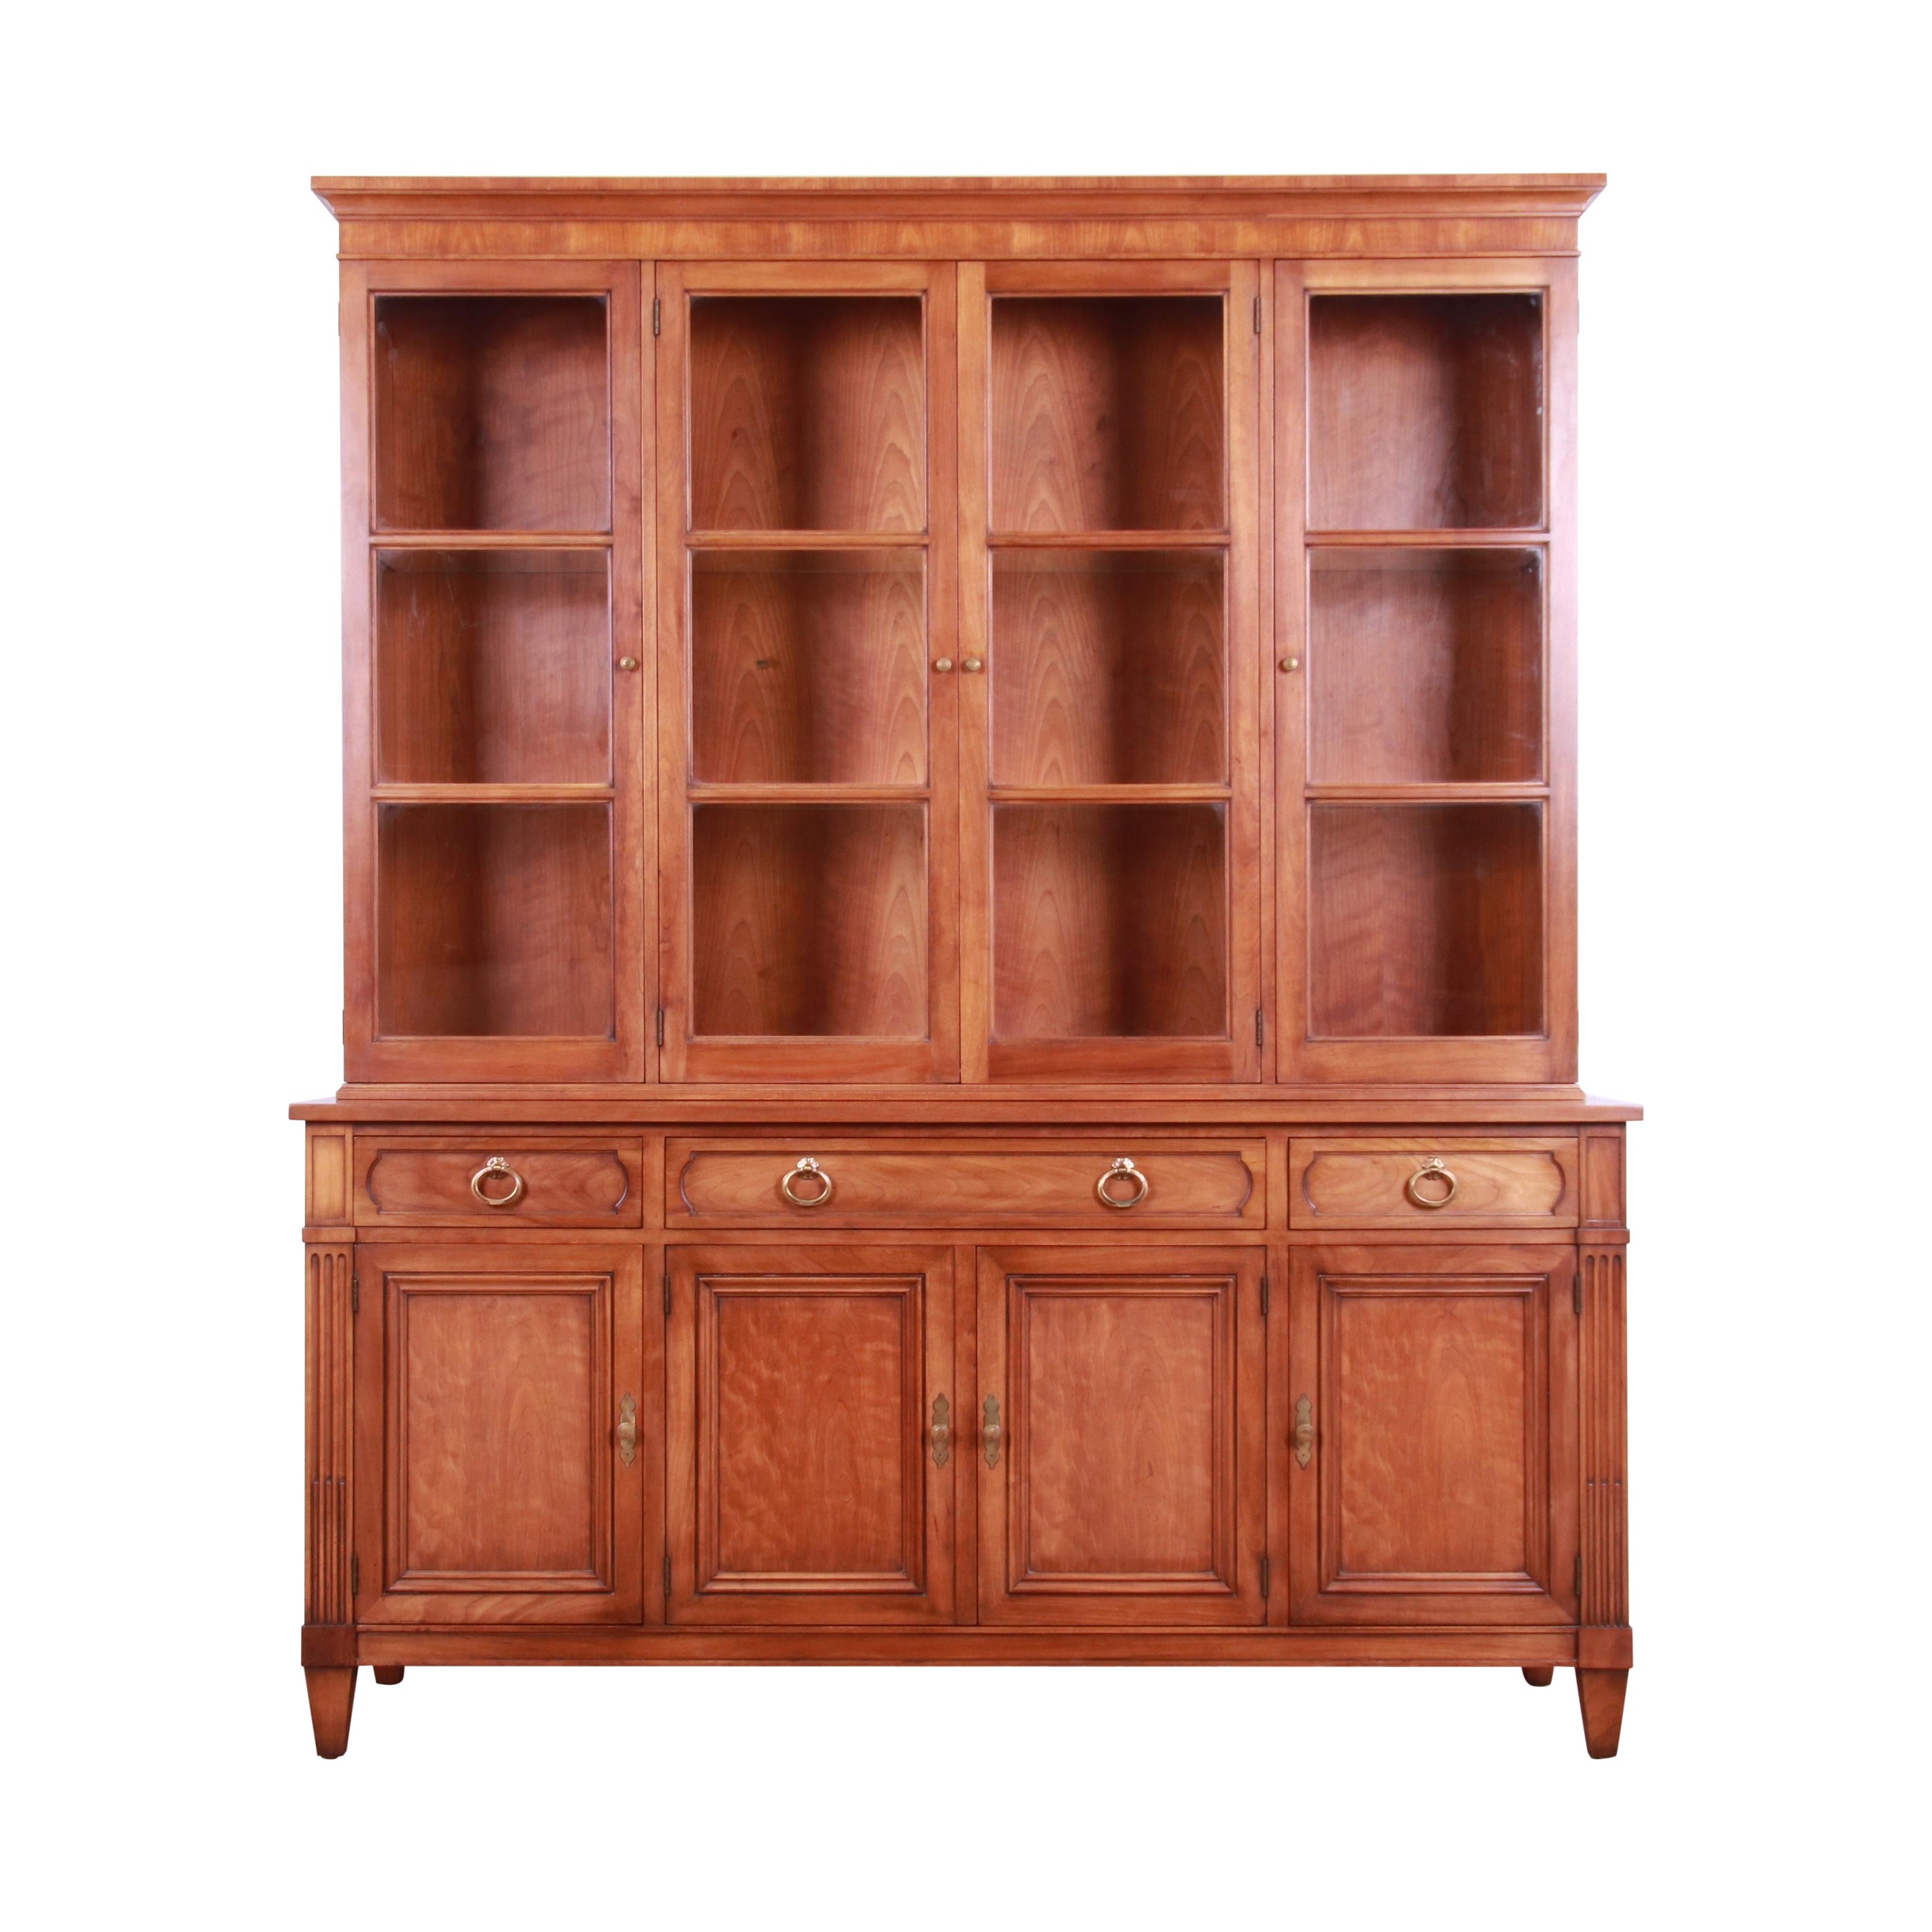 Kindel Furniture Mid-Century French Regency Cherry Breakfront Bookcase Cabinet For Sale